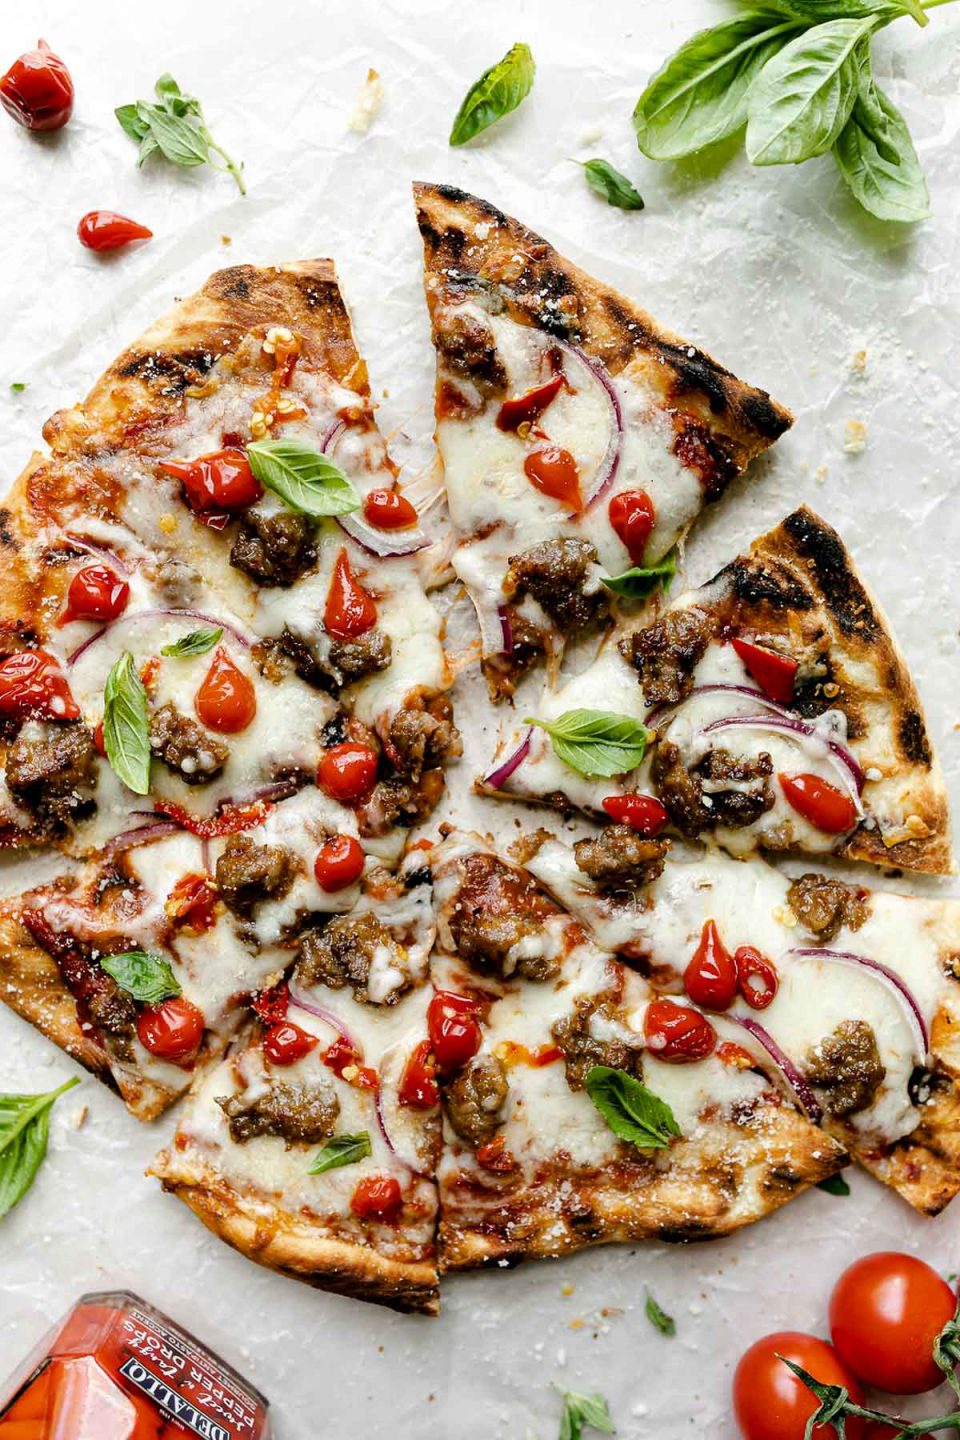 Grilled pizza topped with cheese, Italian sausage, sweetie drop peppers, & fresh basil leaves. The pizza sits atop a white surface, surrounded by fresh basil leaves, tomatoes, & a jar of DeLallo Sweet & Tangy Drop Peppers.